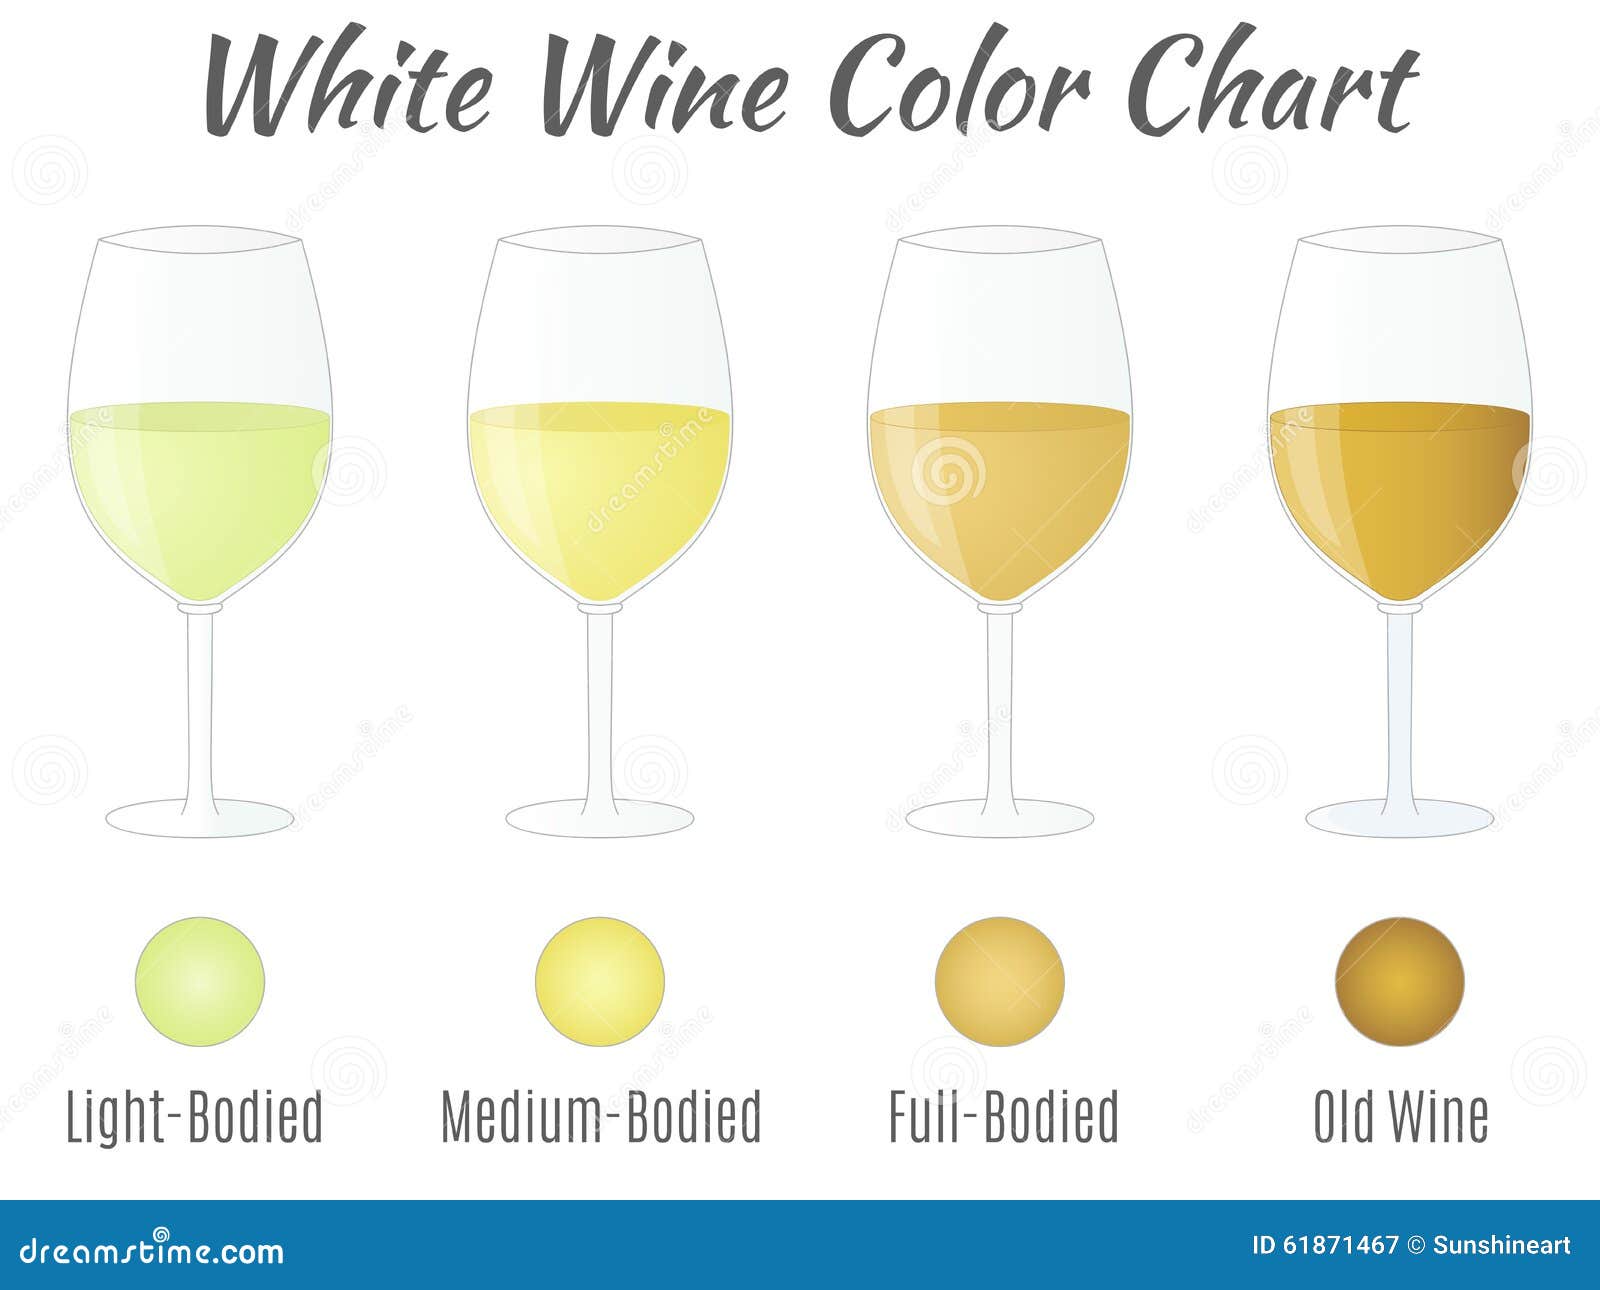 Types Of Wine Glasses Chart